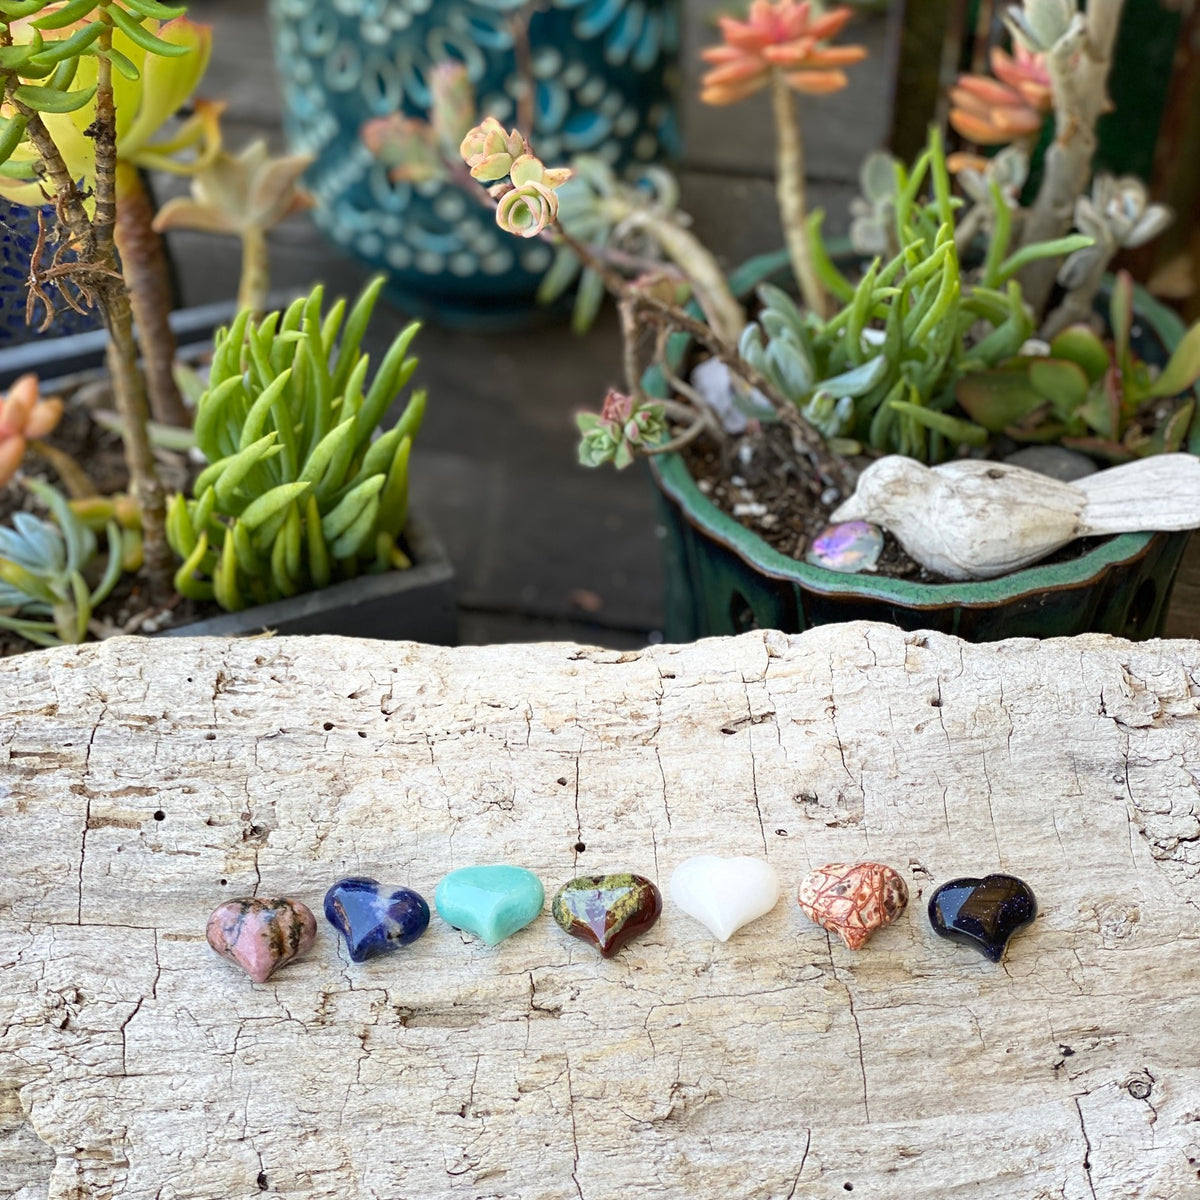 Unique and genuine heart shaped gemstones. Set of 7 chakra stones, Metaphysical Crystals that help you connect with your chakras.